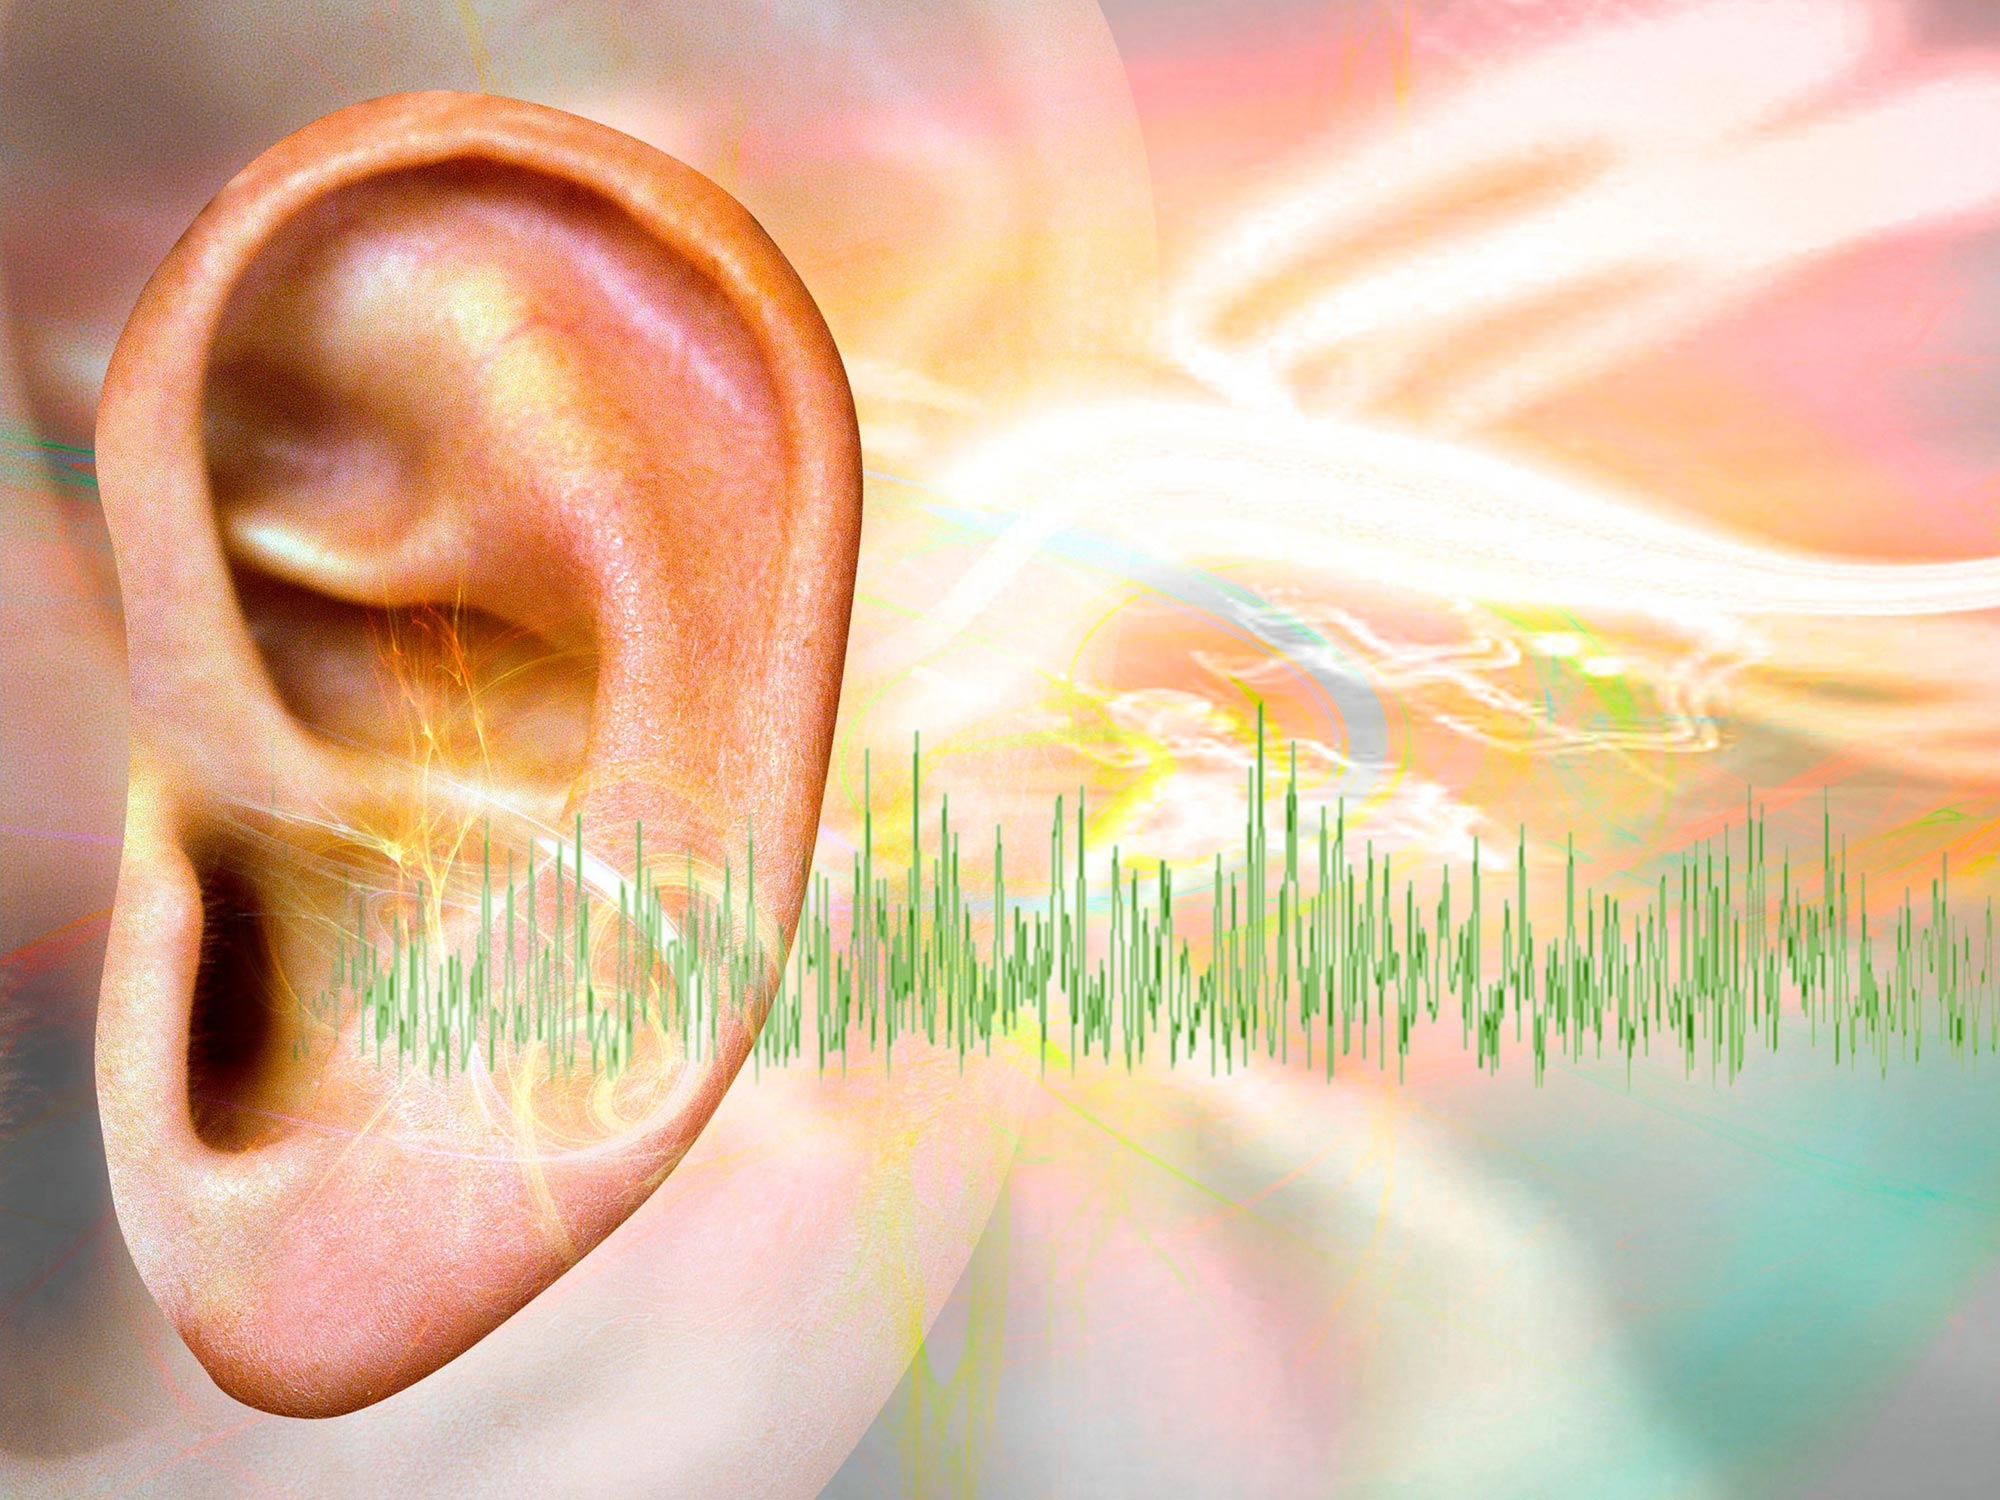 salut indvirkning skadedyr Significant Breakthrough in Search for Tinnitus Cure